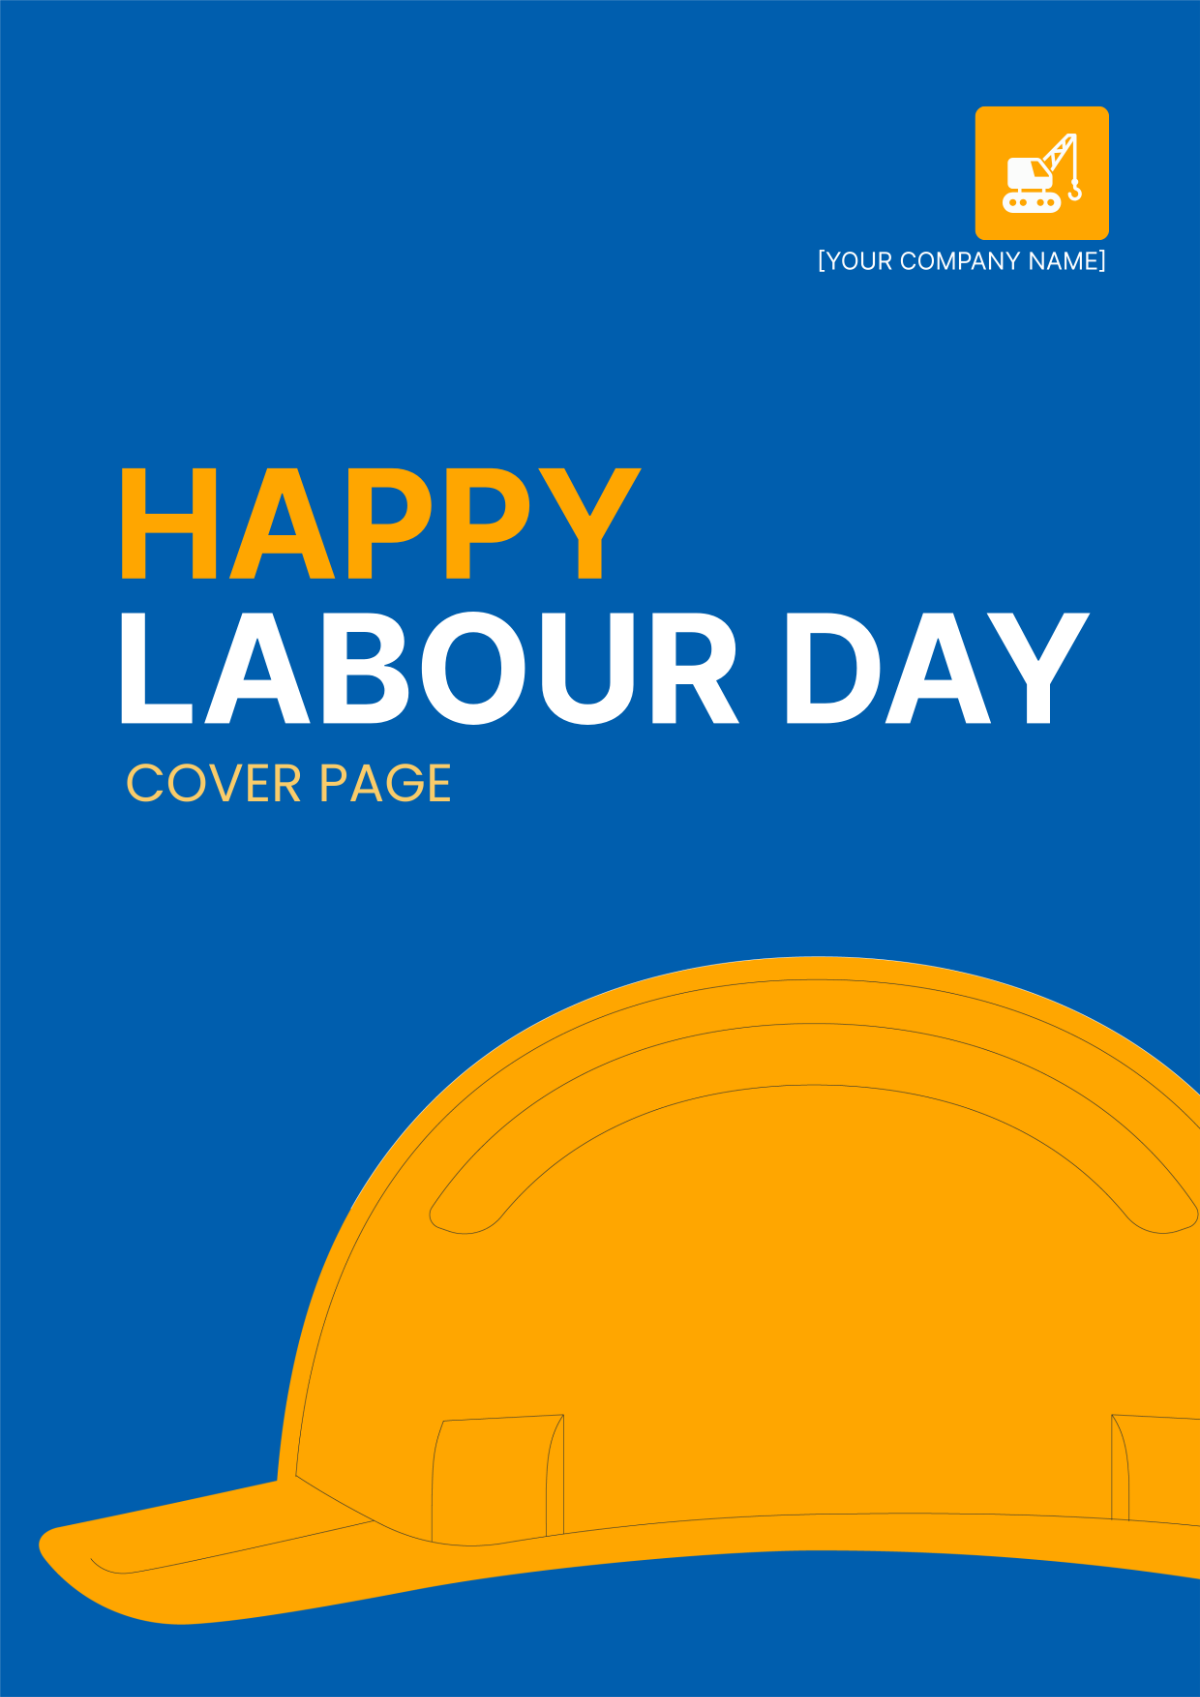 Happy Labour Day Cover Page Template